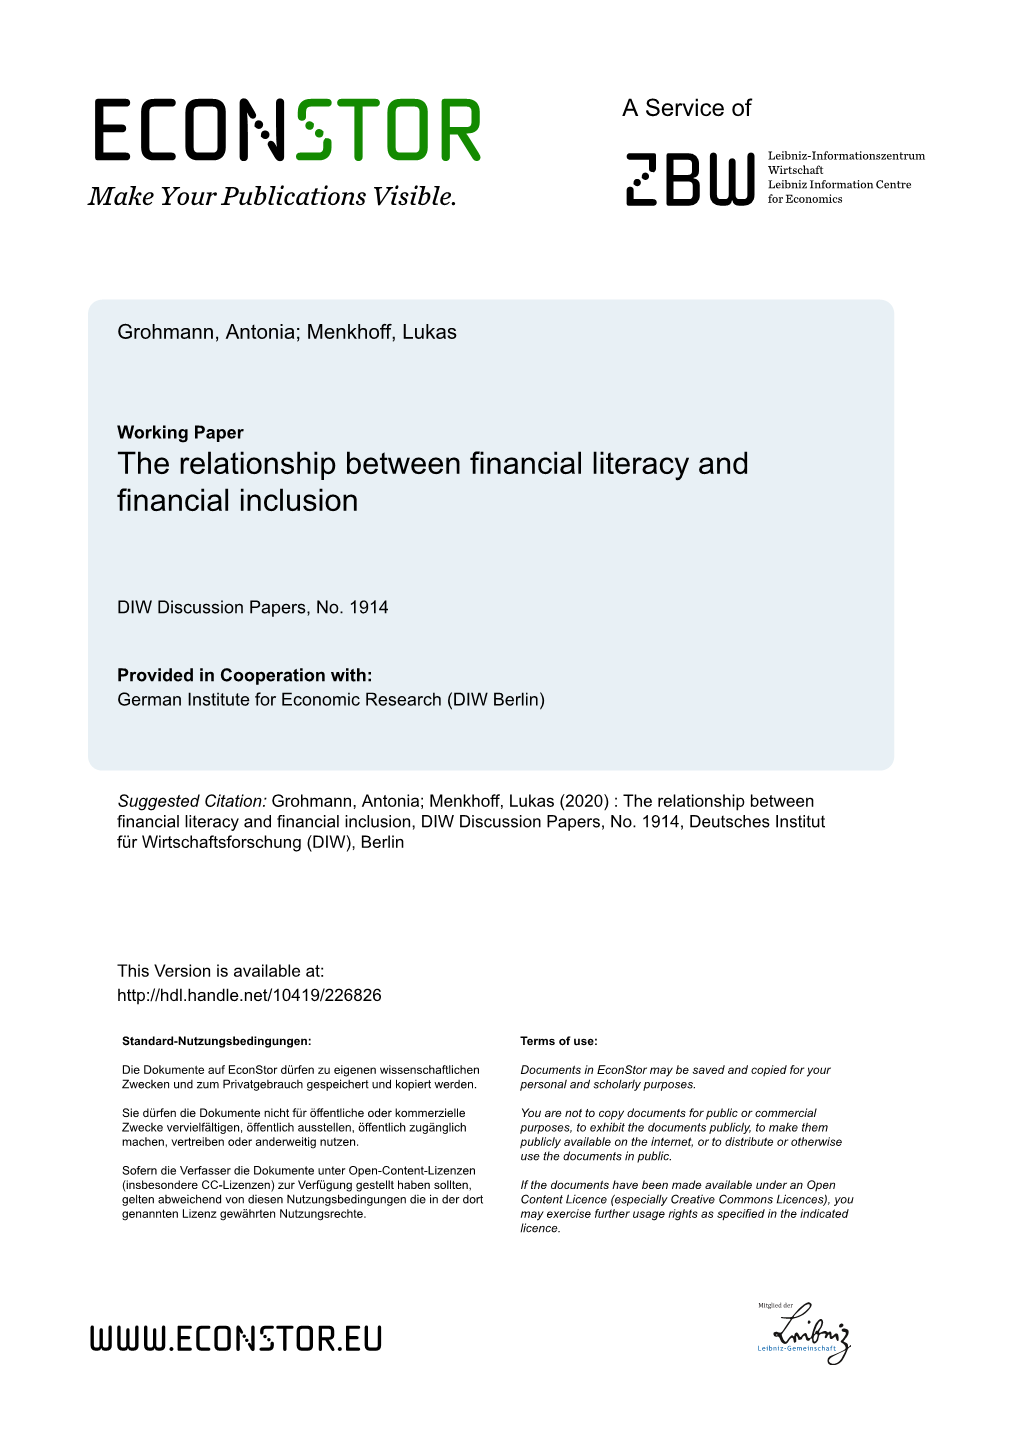 The Relationship Between Financial Literacy and Financial Inclusion